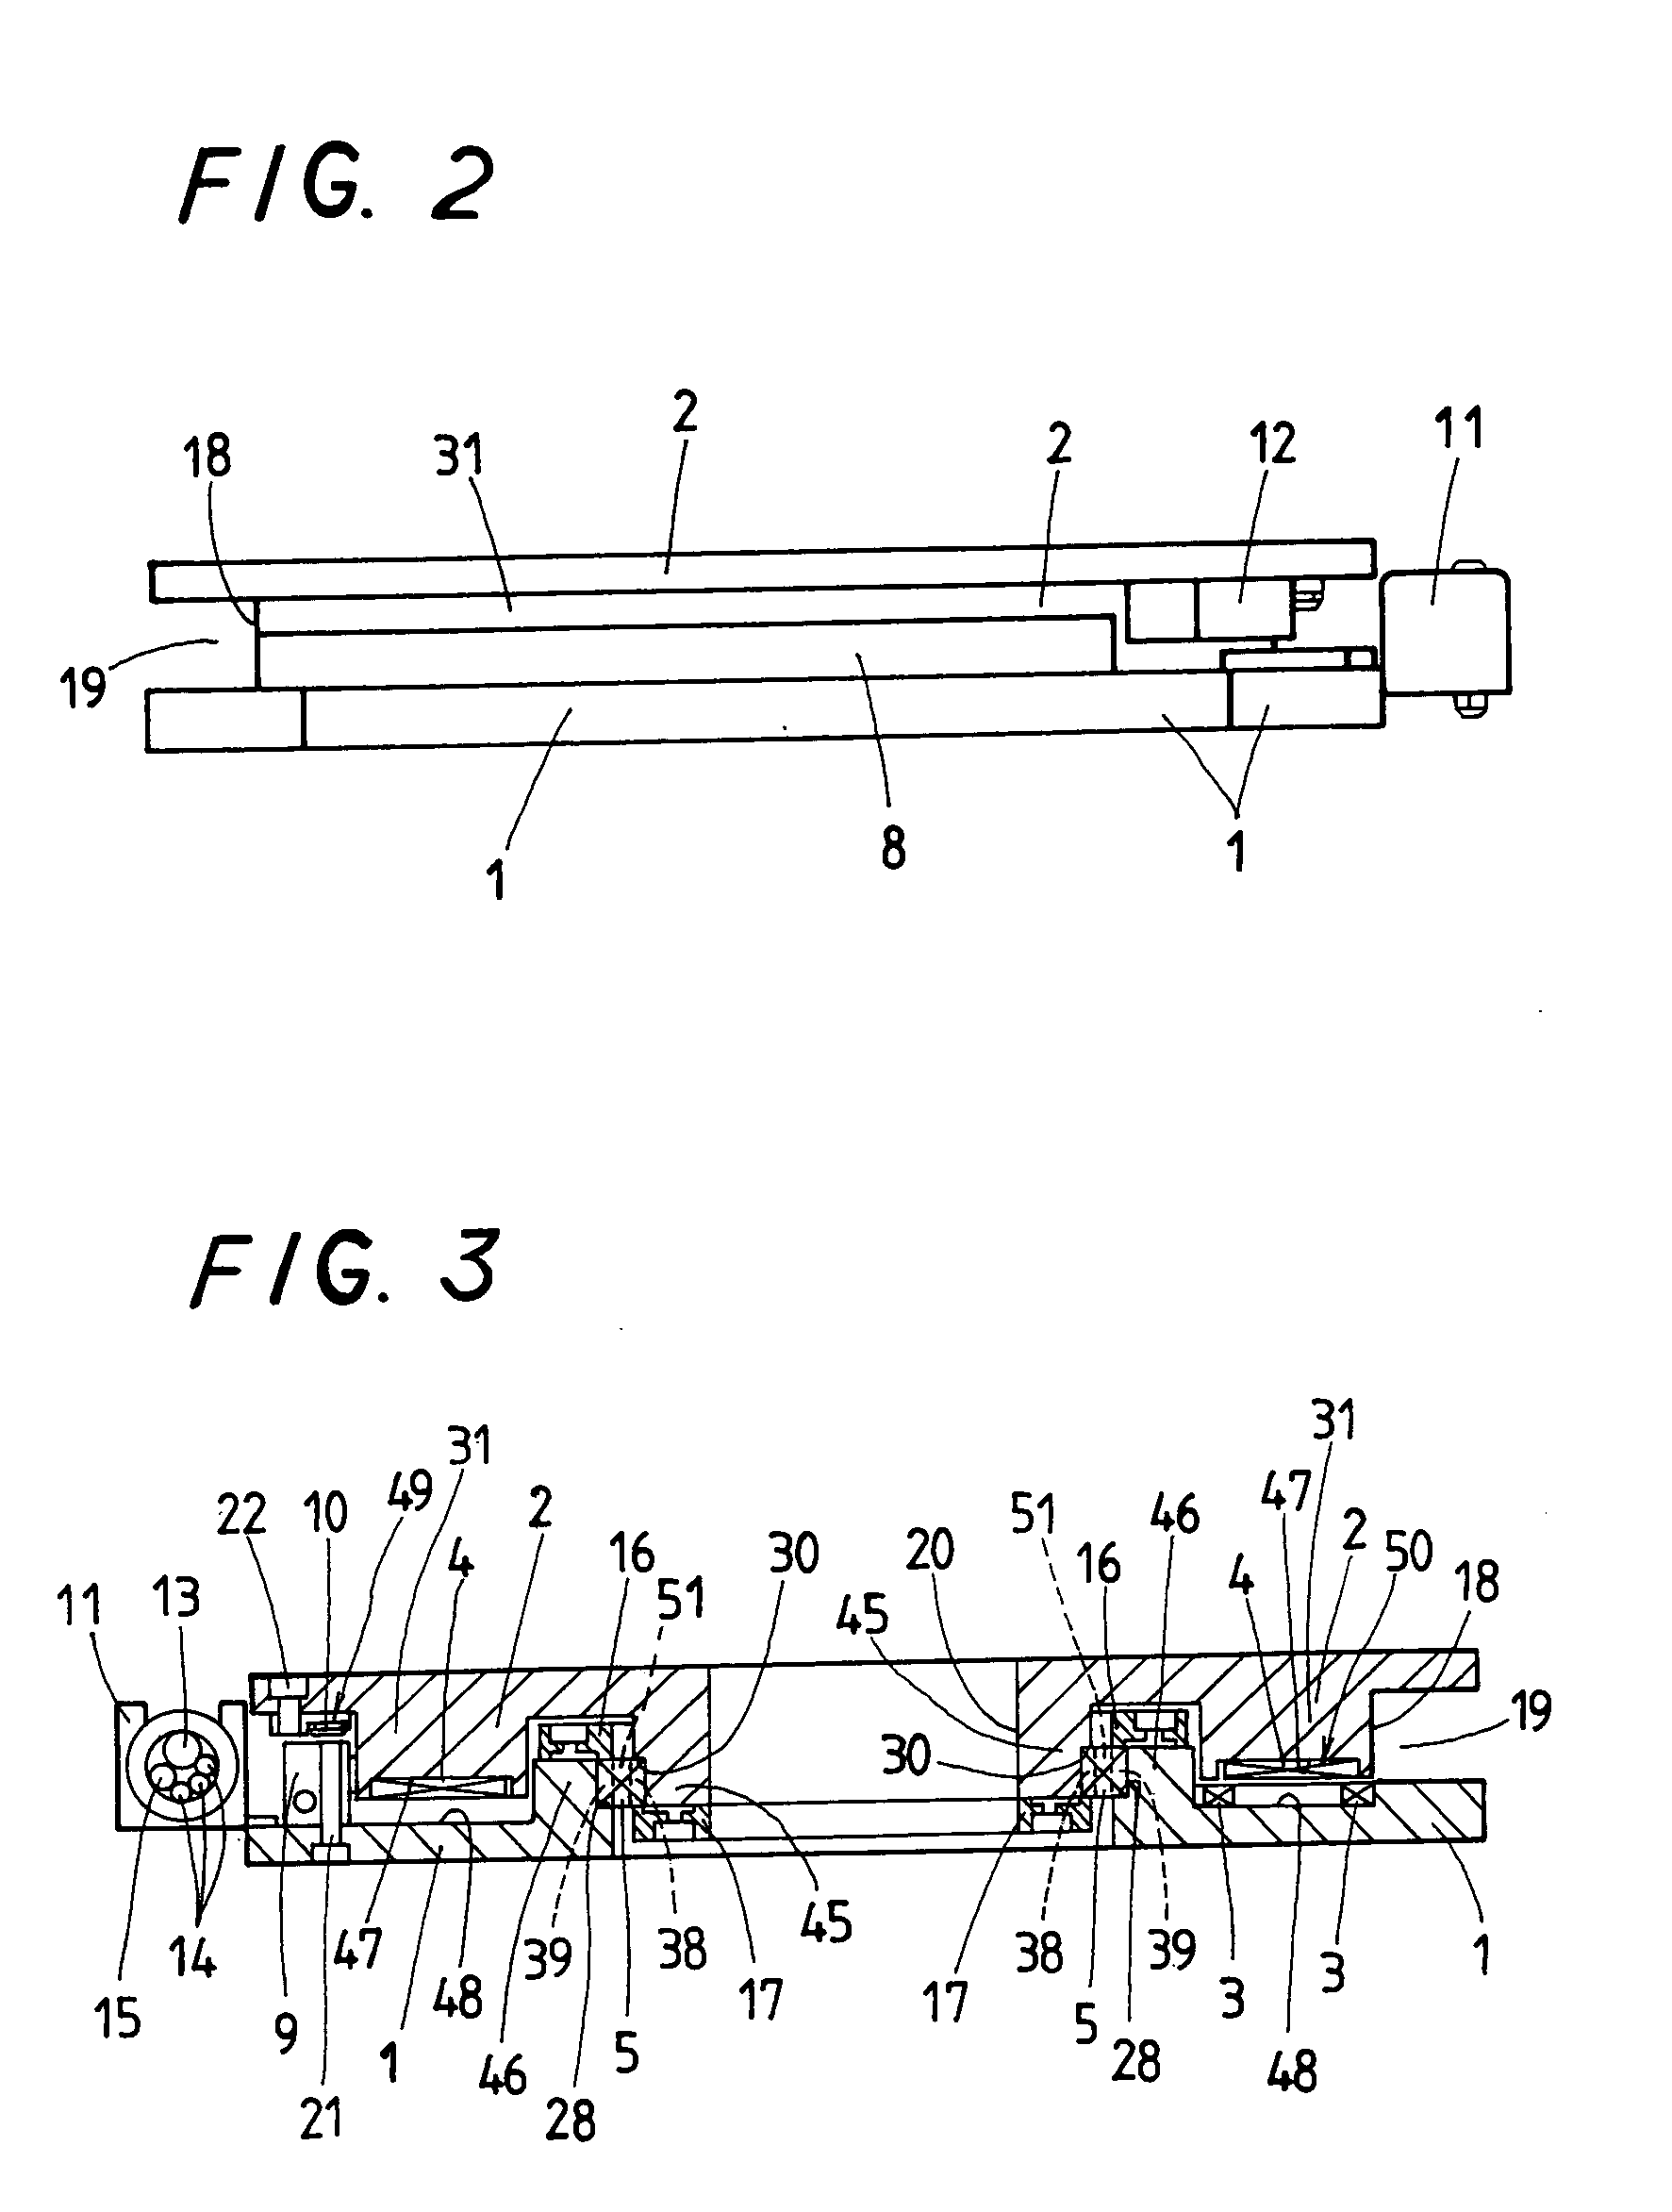 Position-control stage with onboard linear motor